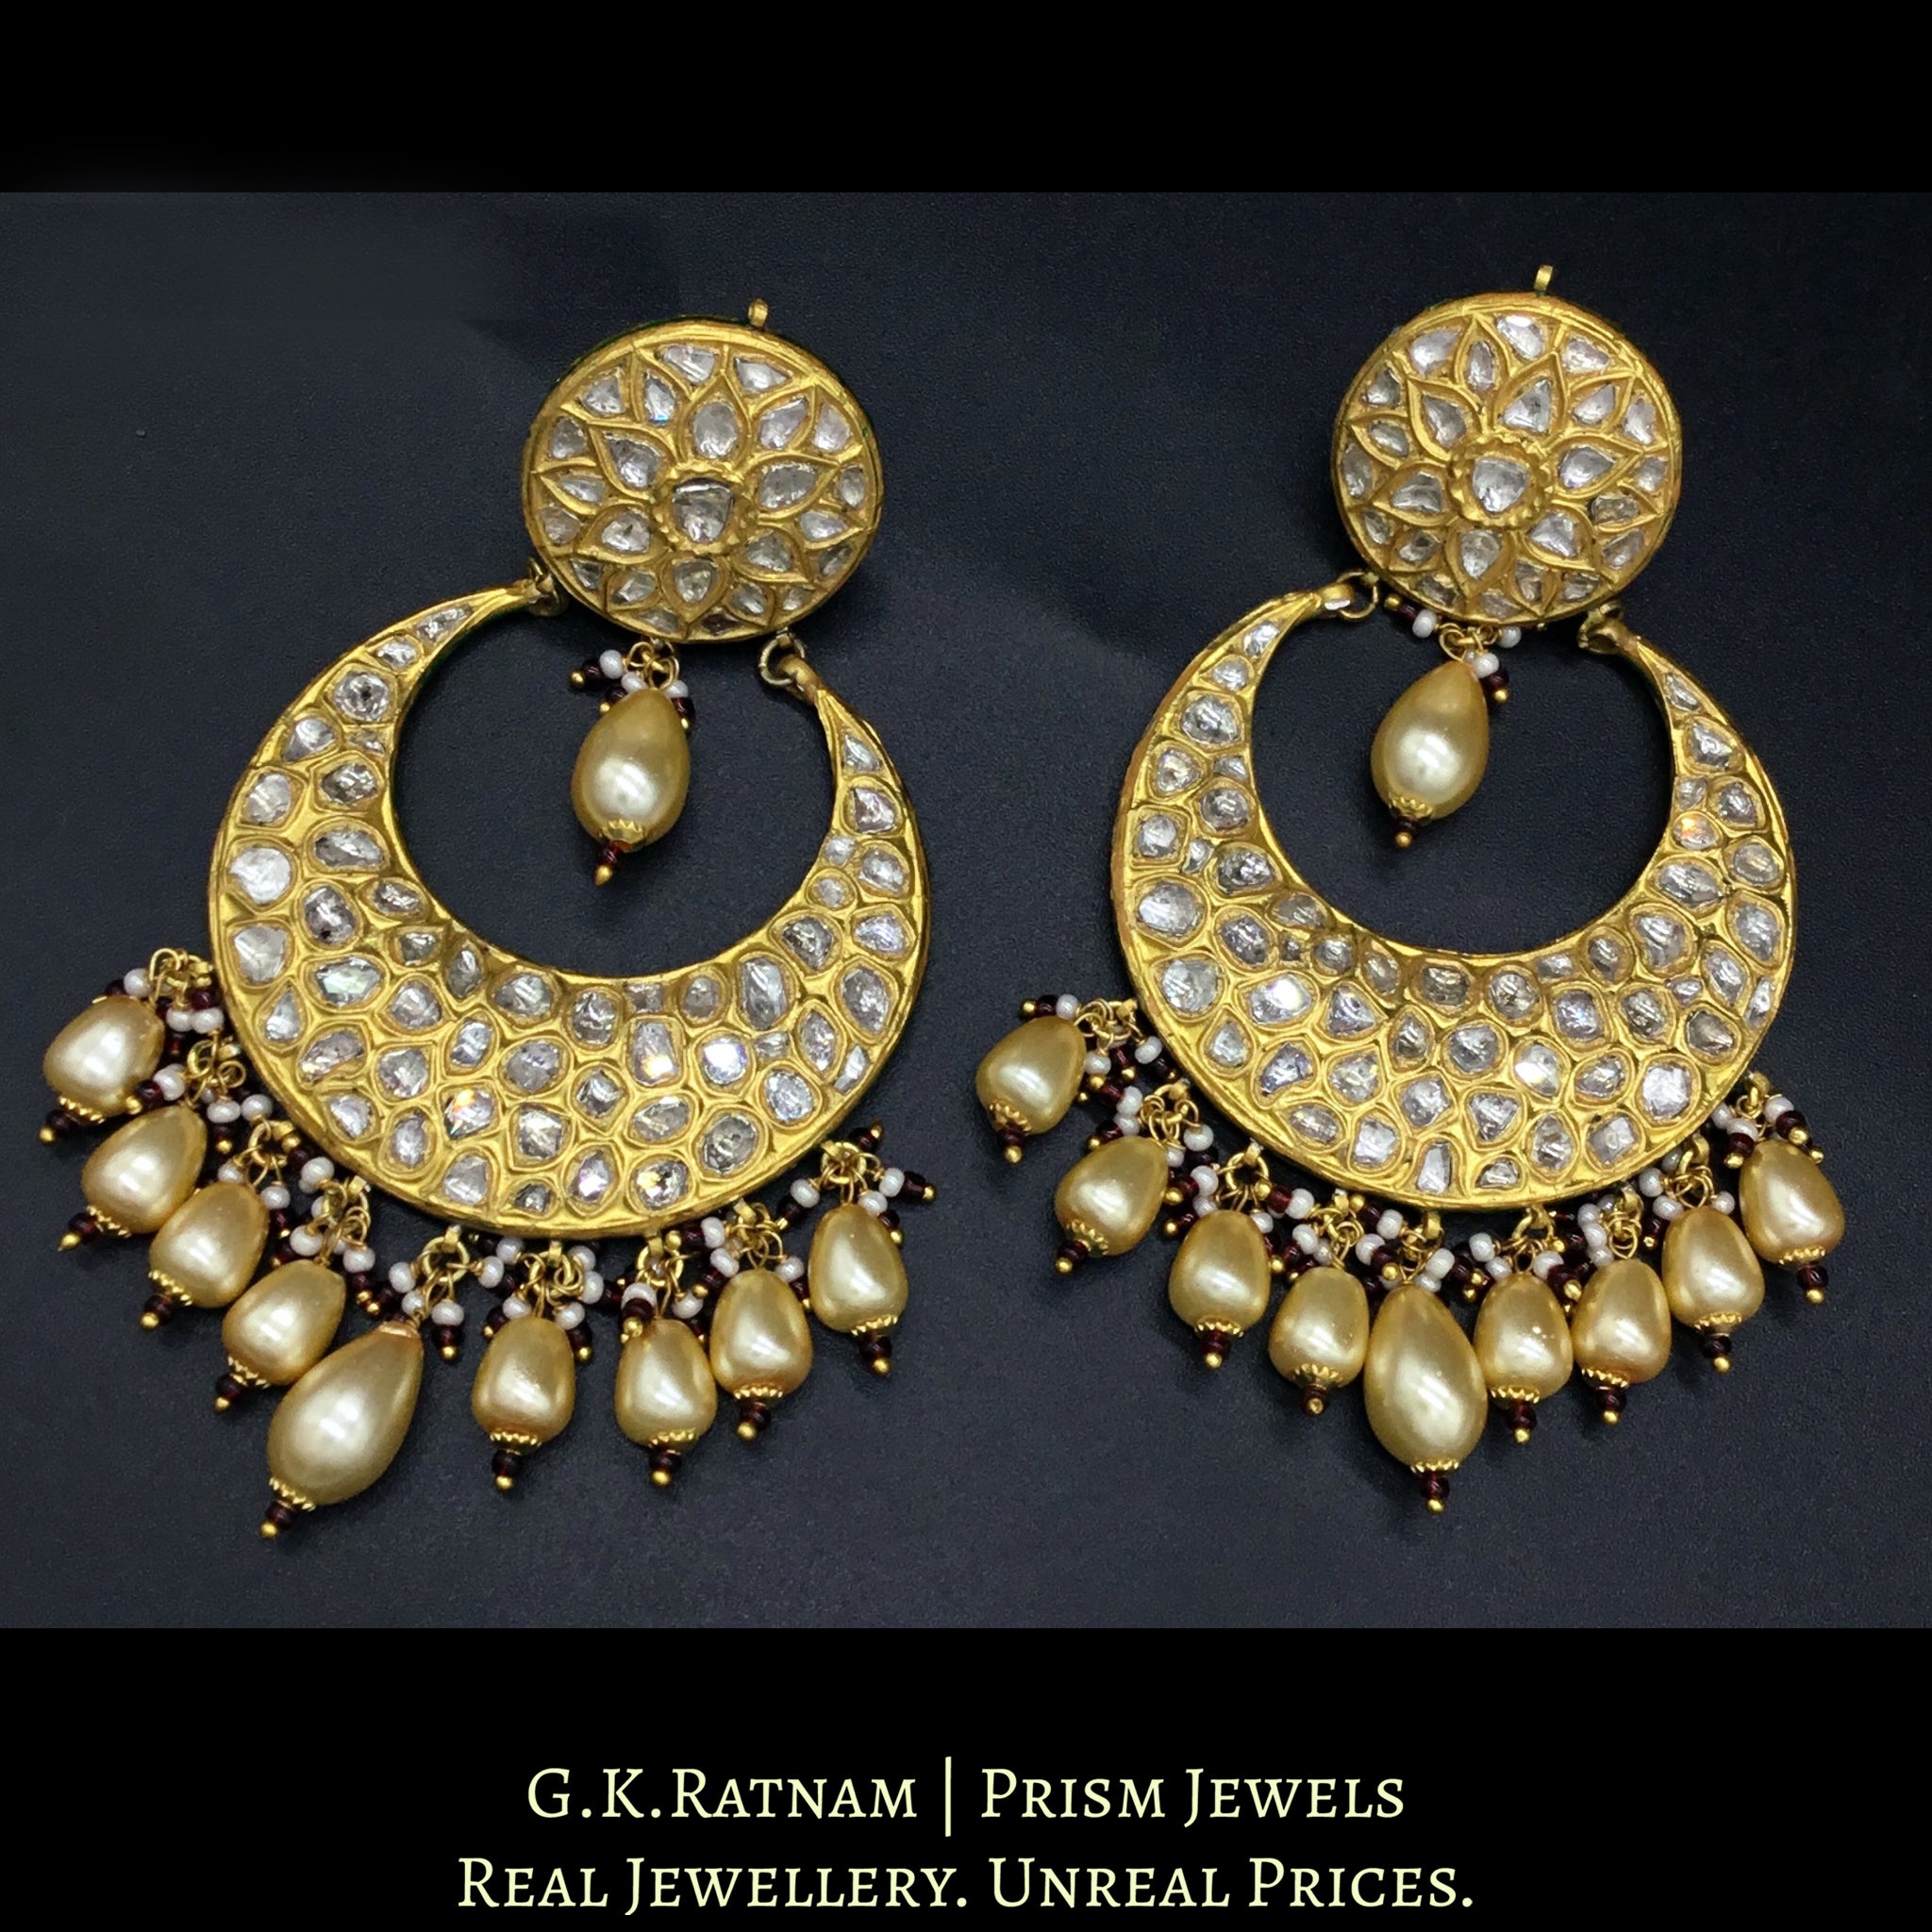 23k Gold and Diamond Polki broad Chand Bali Earring pair with honeycomb-like uncut pattern